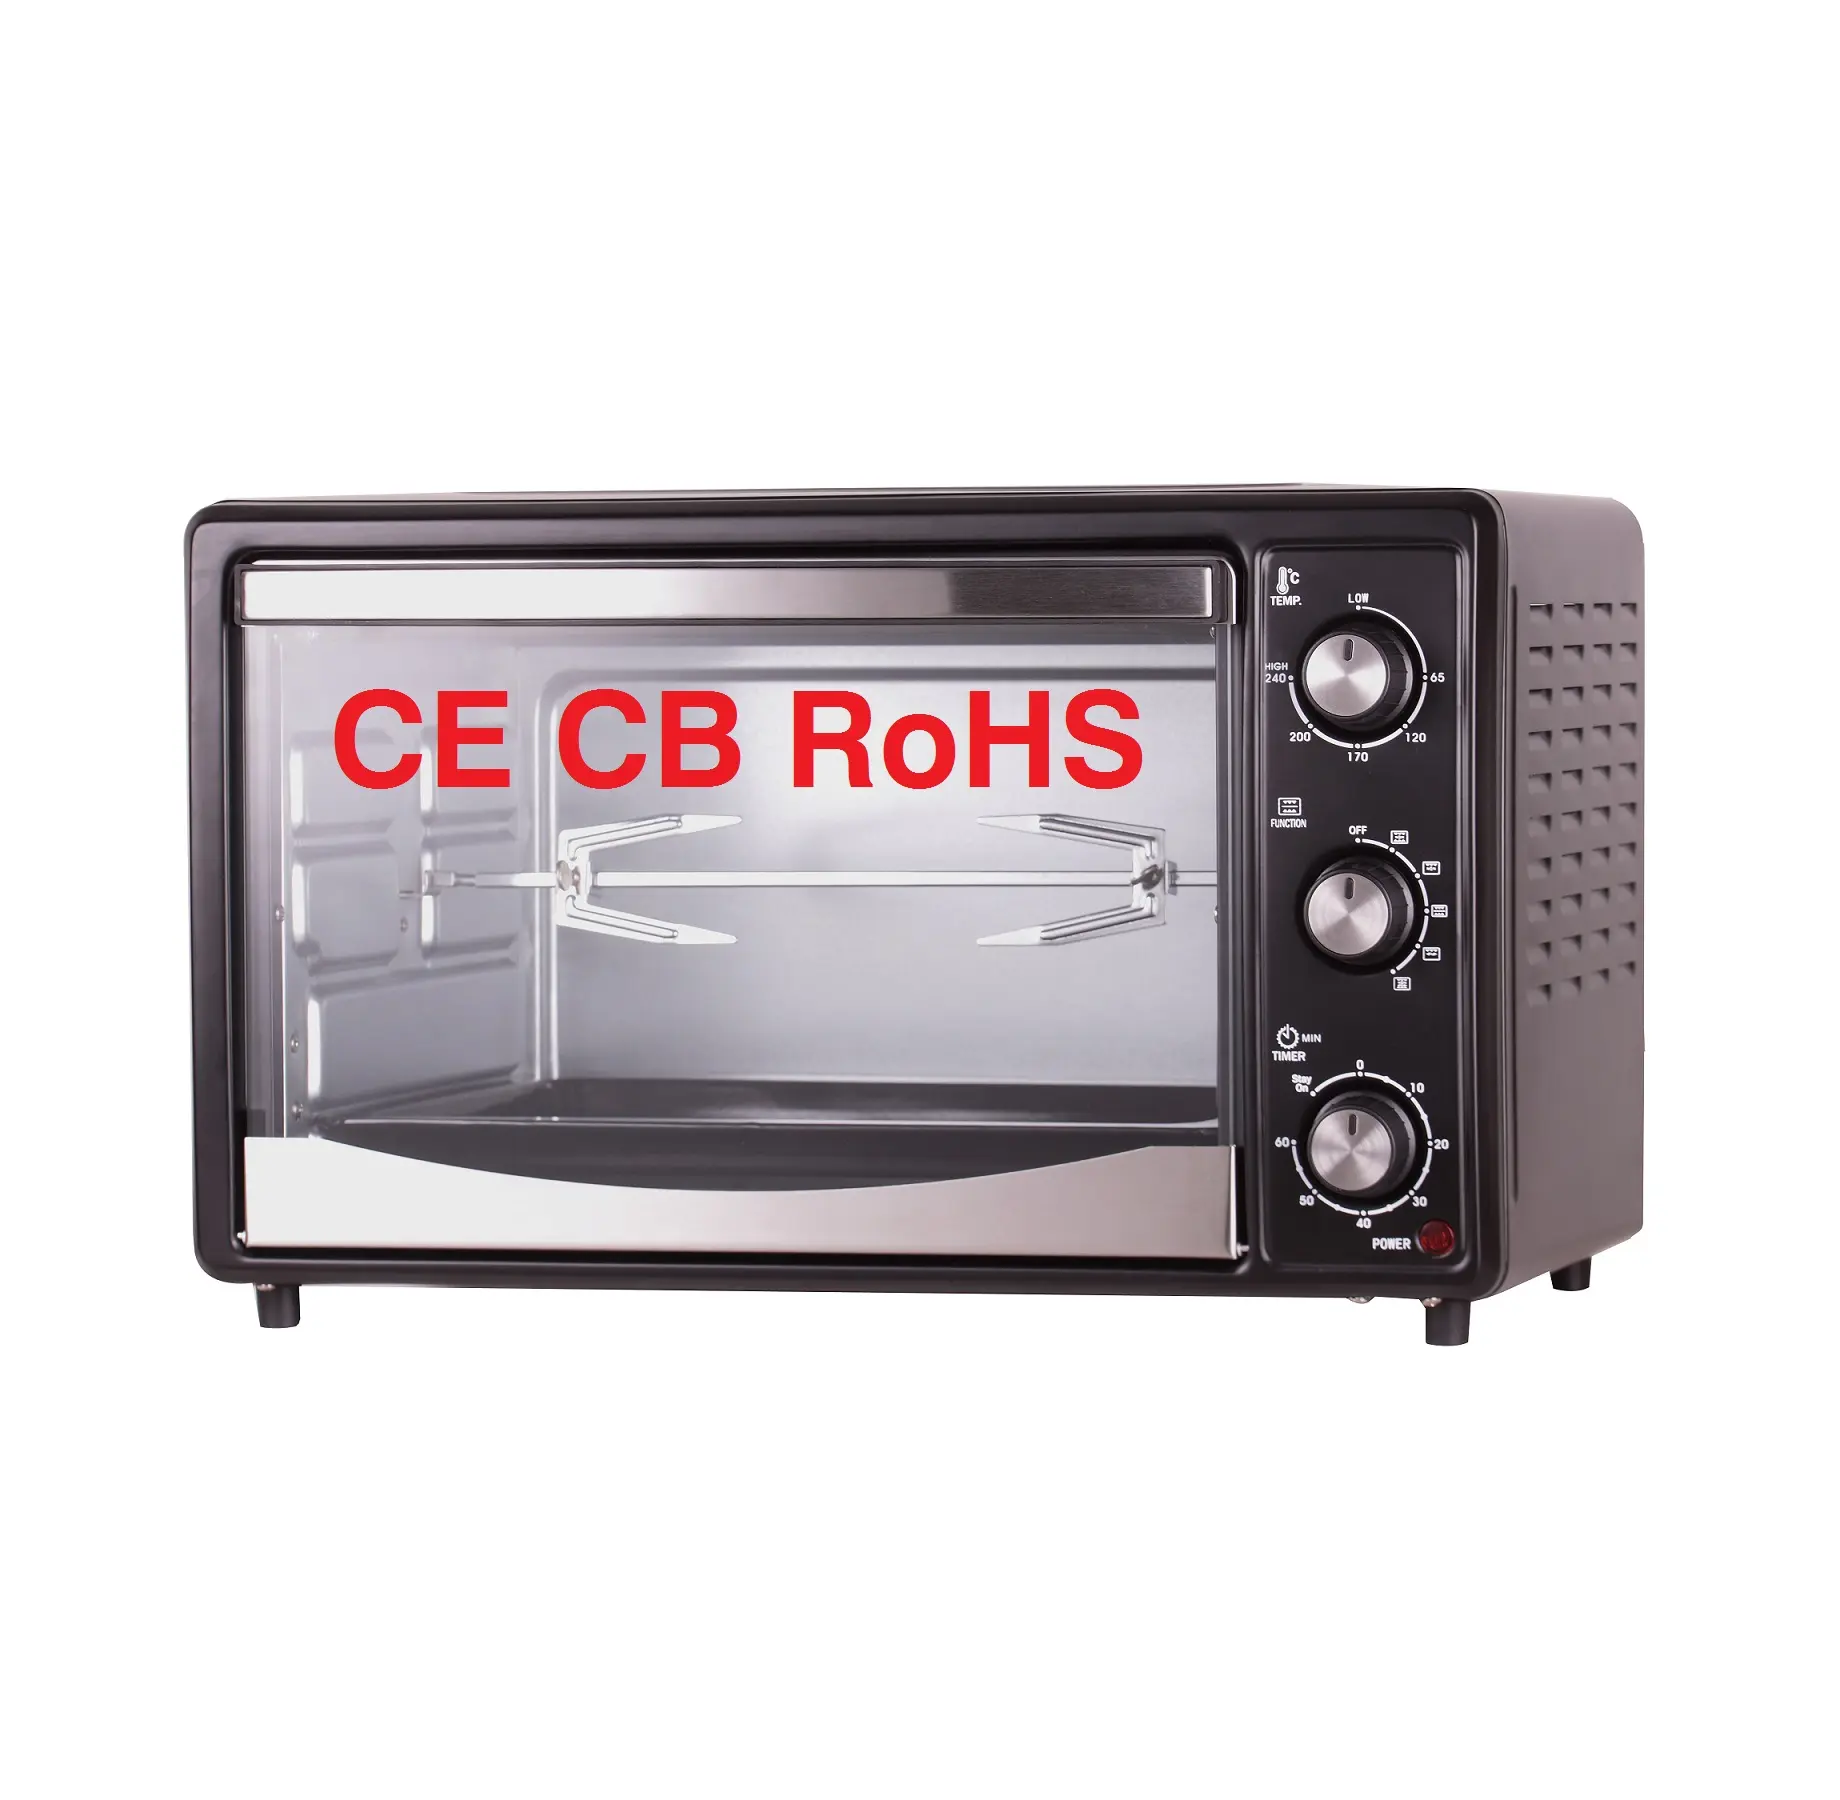 25/27L New Design Toaster Oven Black Steel Stainless Power Warm Interior Timer Color Stick Material Mechanical Bake